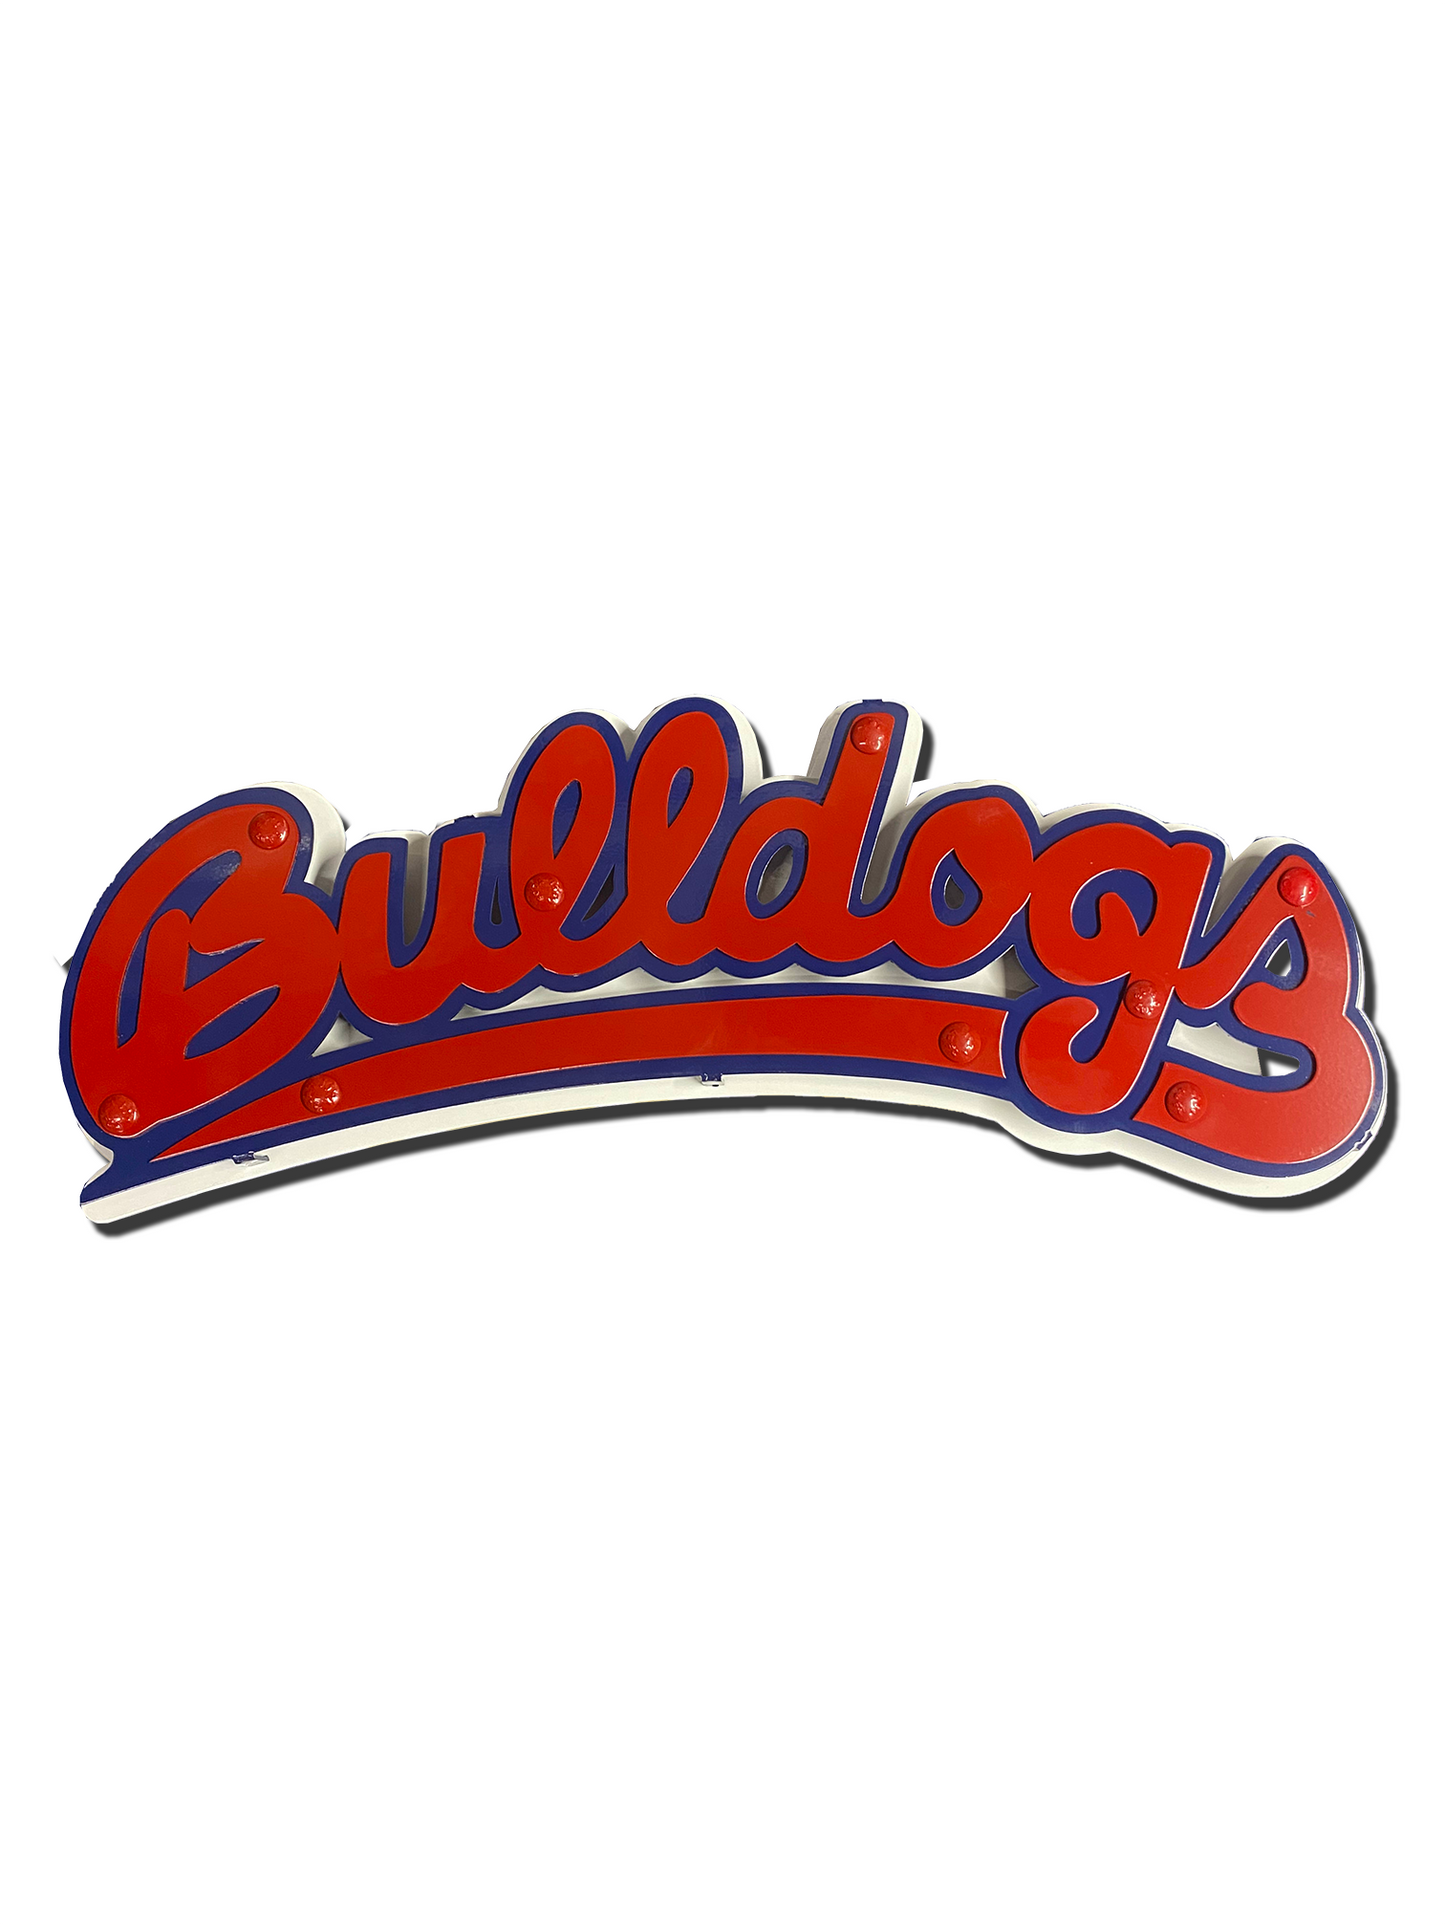 FRESNO STATE BULLDOGS 3D WALL HANGING